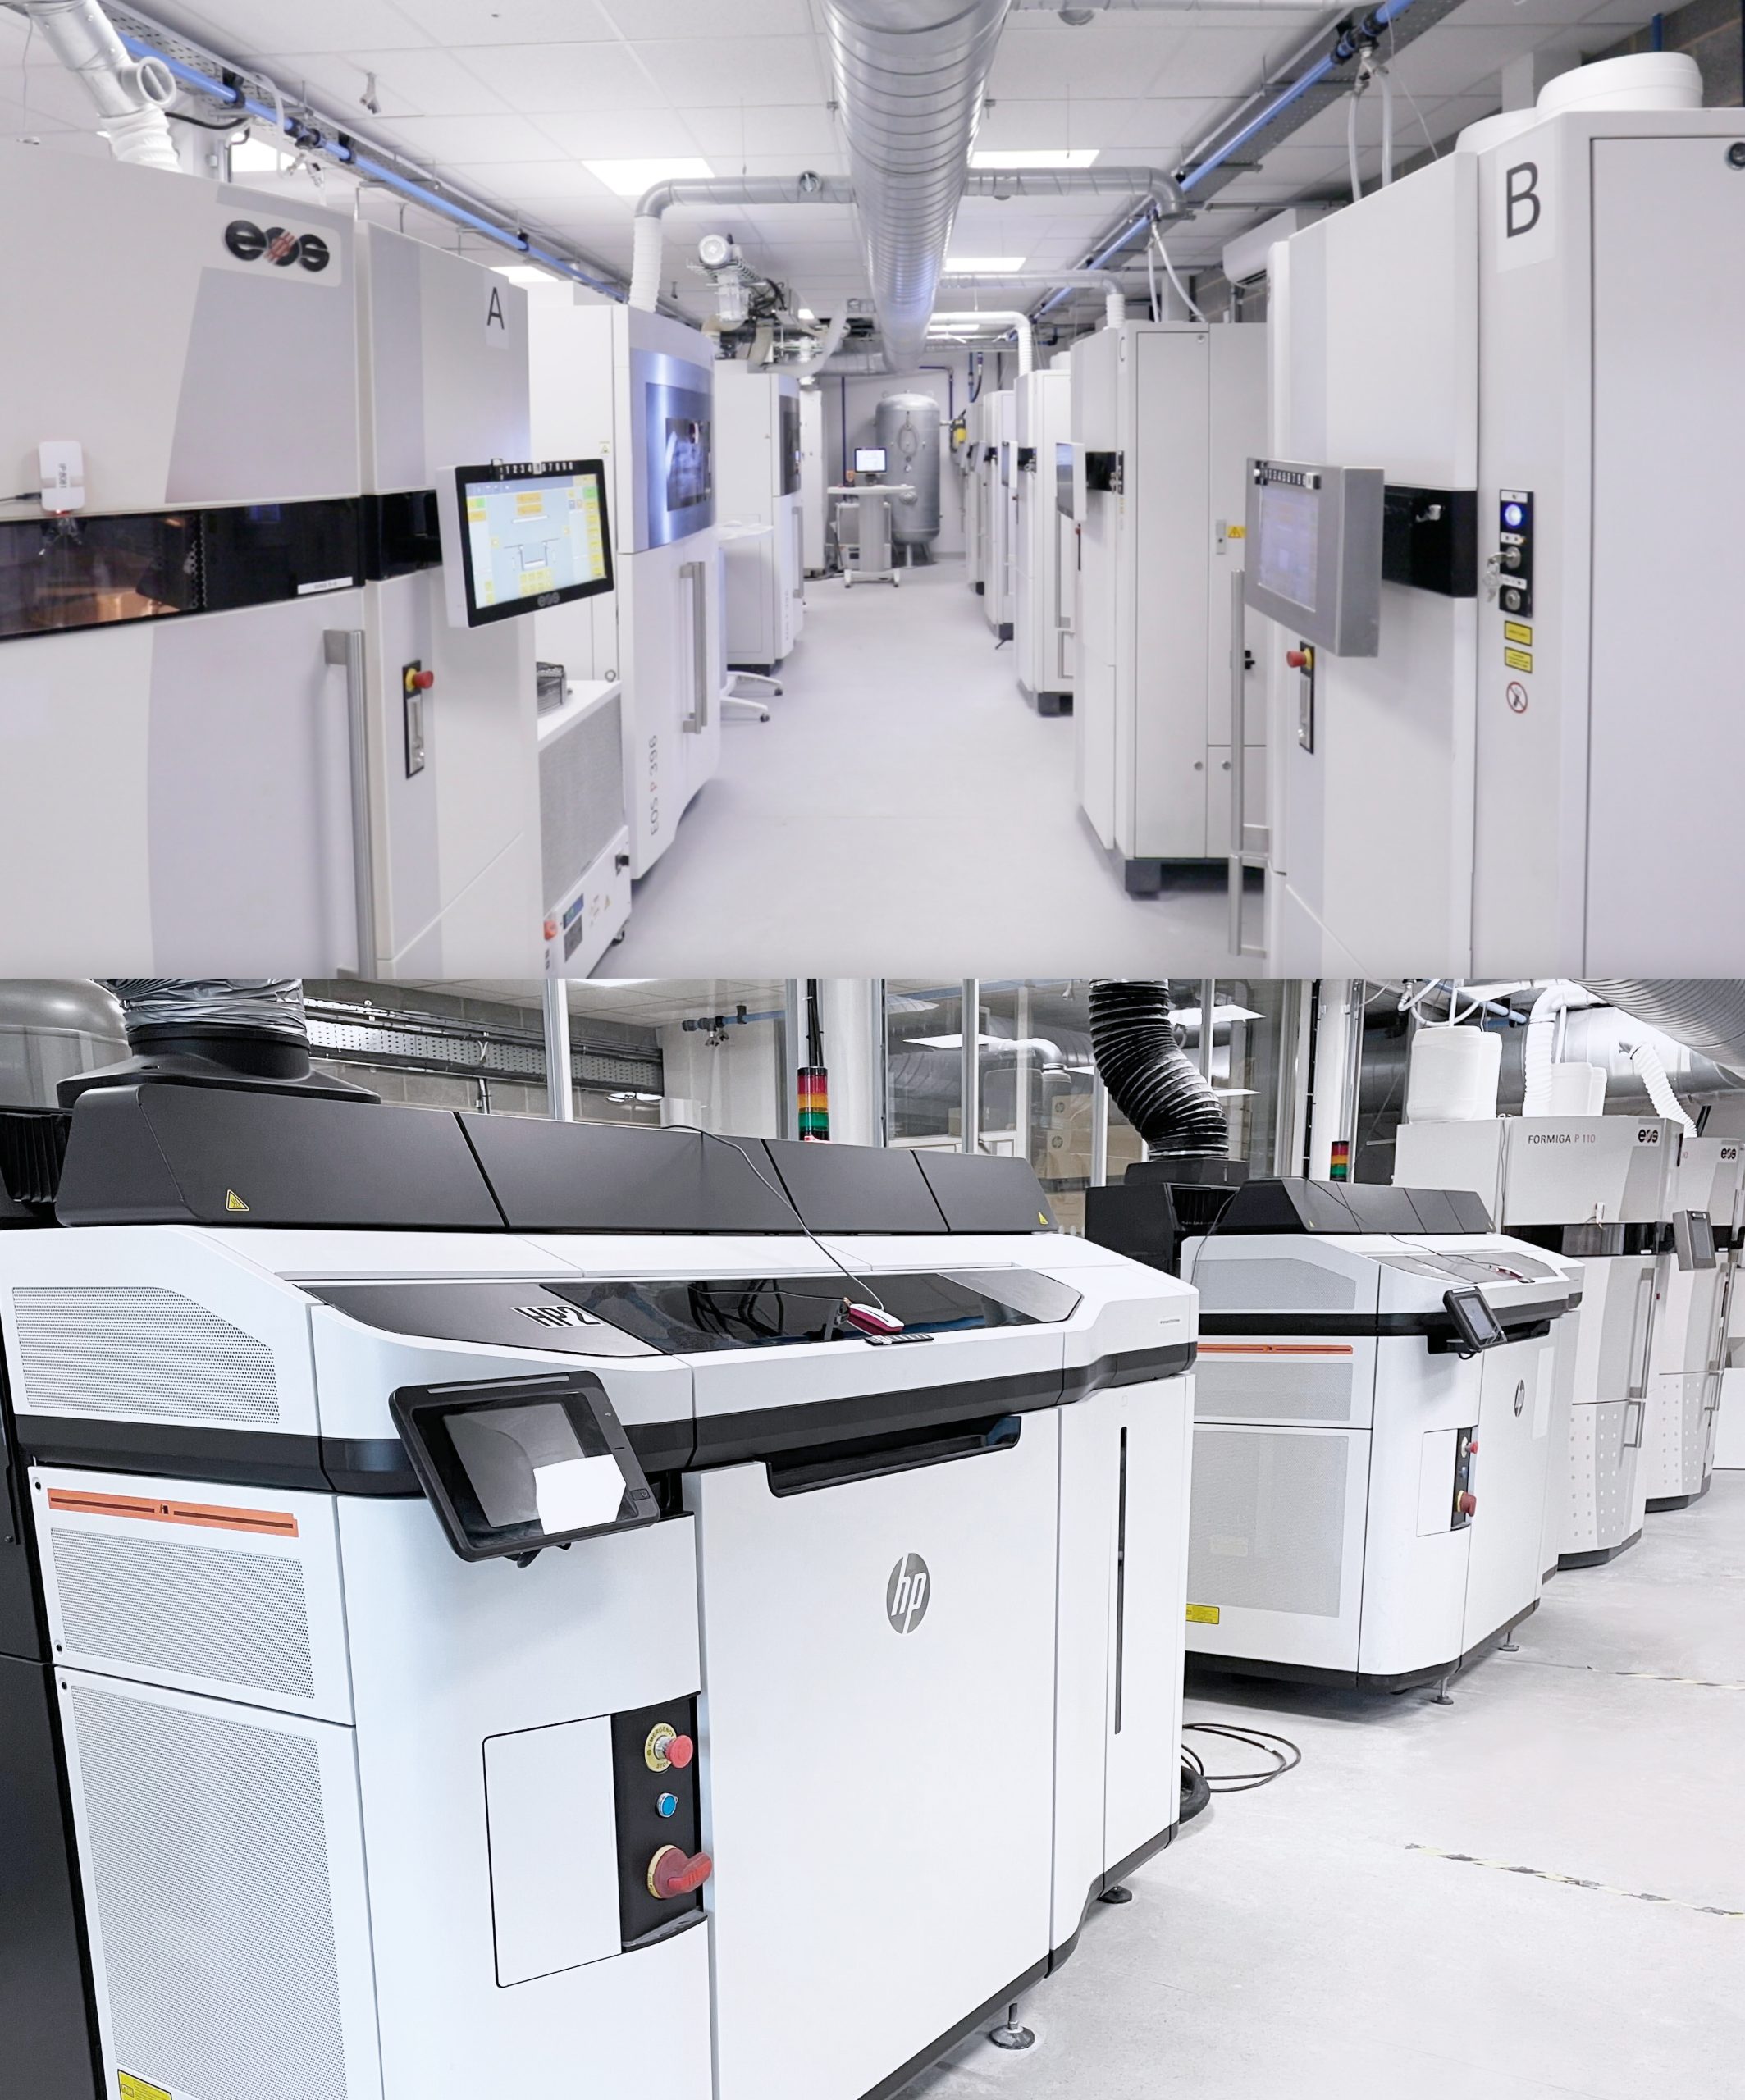 Alle slags åndelig Ansigt opad 3DPRINTUK doubles production capacity with new HP MJF system and grows EOS  print farm - 3D Printing Industry